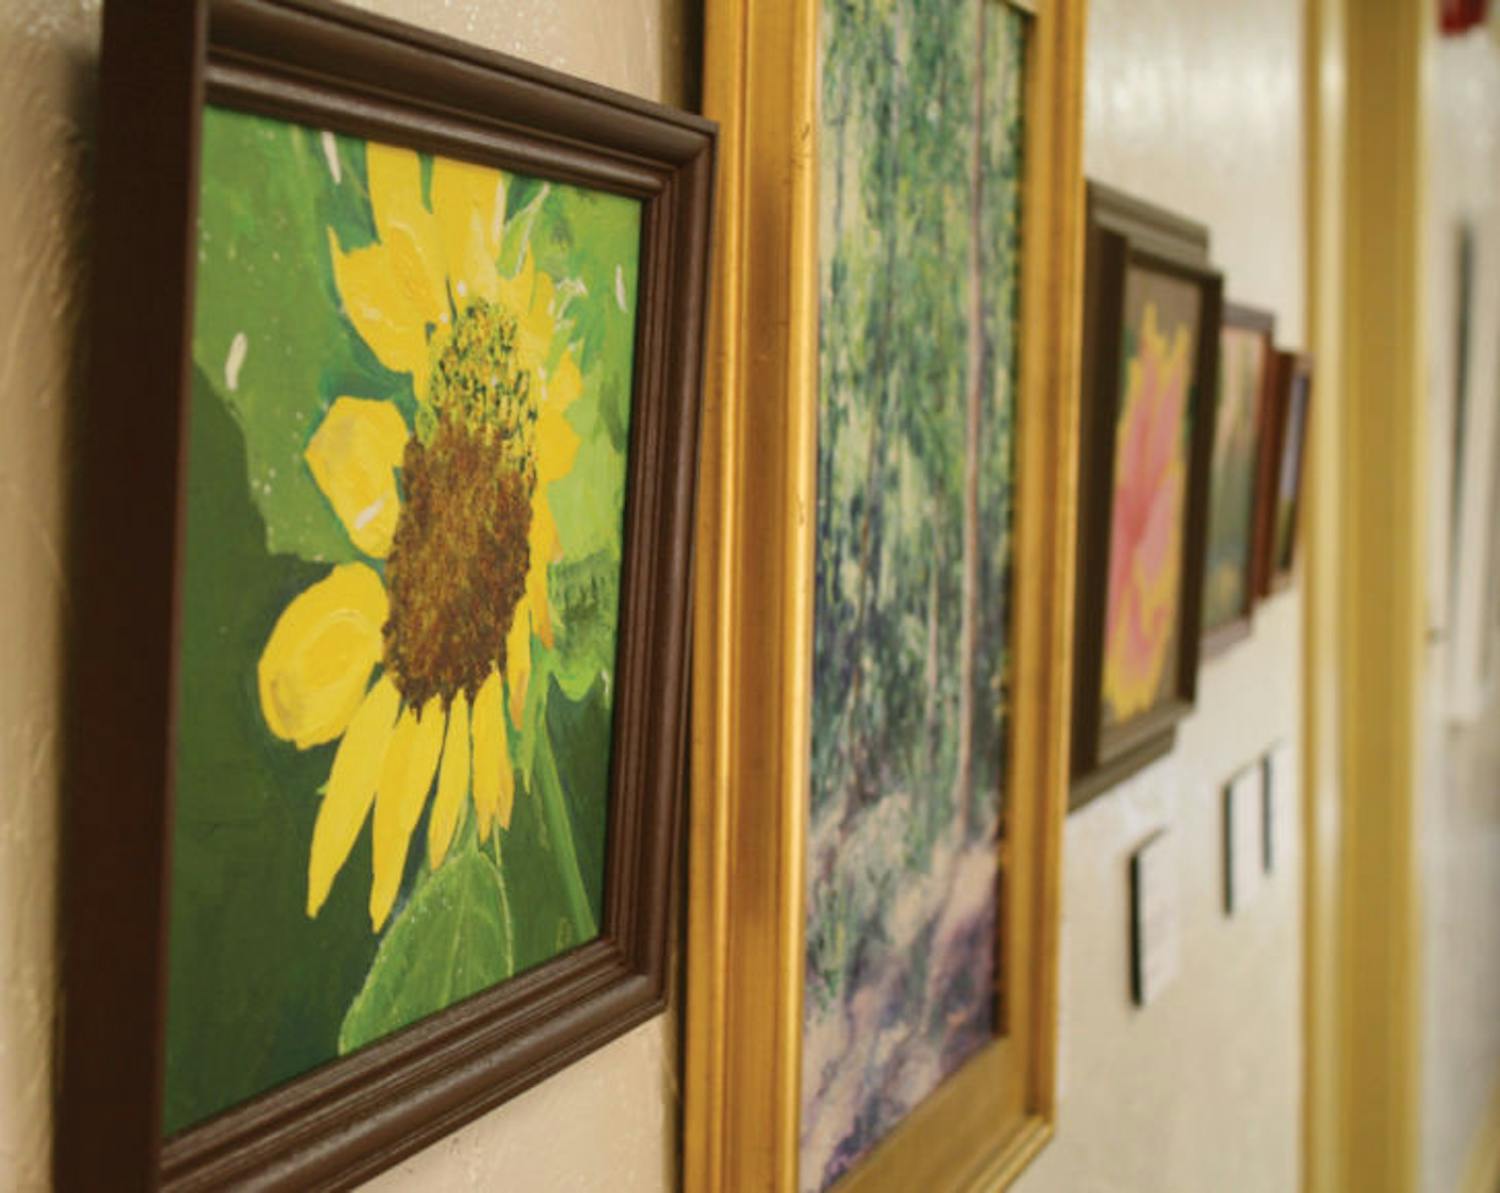 The Thomas Center Mezzanine Gallery displays work created by Alachua County Public Schools staff for the exhibition “The Artist in All of Us.” The show is scheduled to run until Nov. 16.